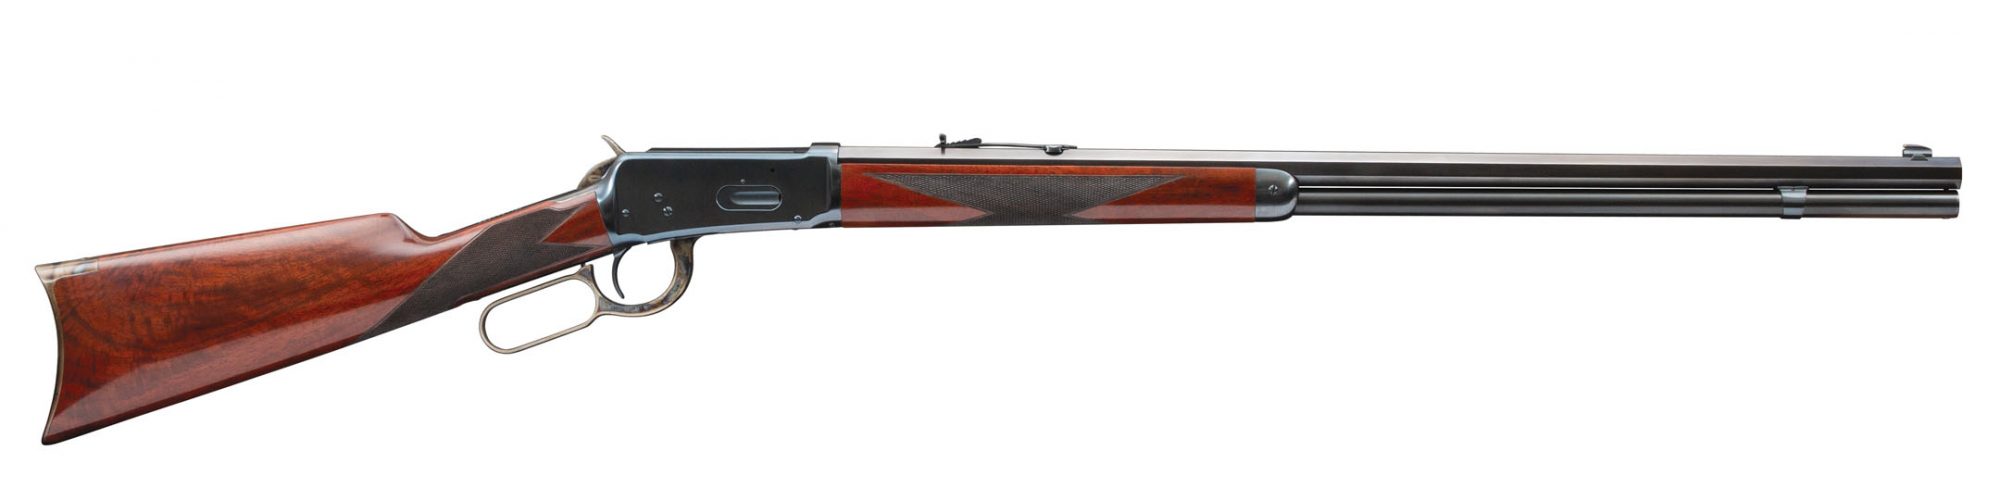 Winchester 1894 in .30-30 Winchester from 1896, after restoration by Turnbull Restoration Co. of Bloomfield, NY